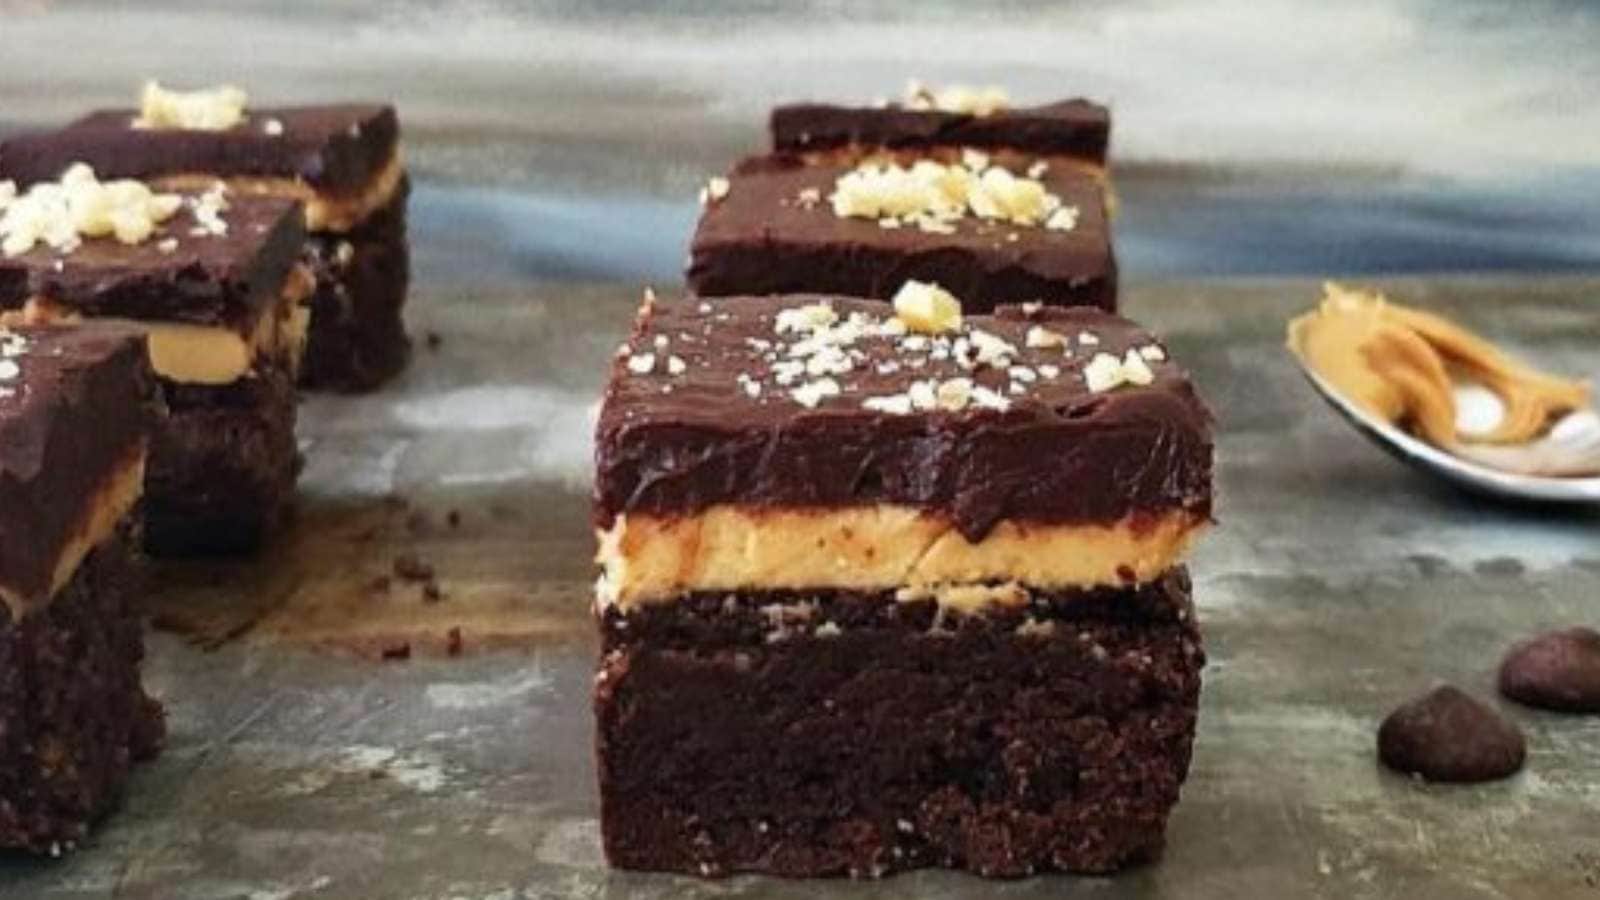 Peanut Butter Brownies recipe by Whisking Wolf.